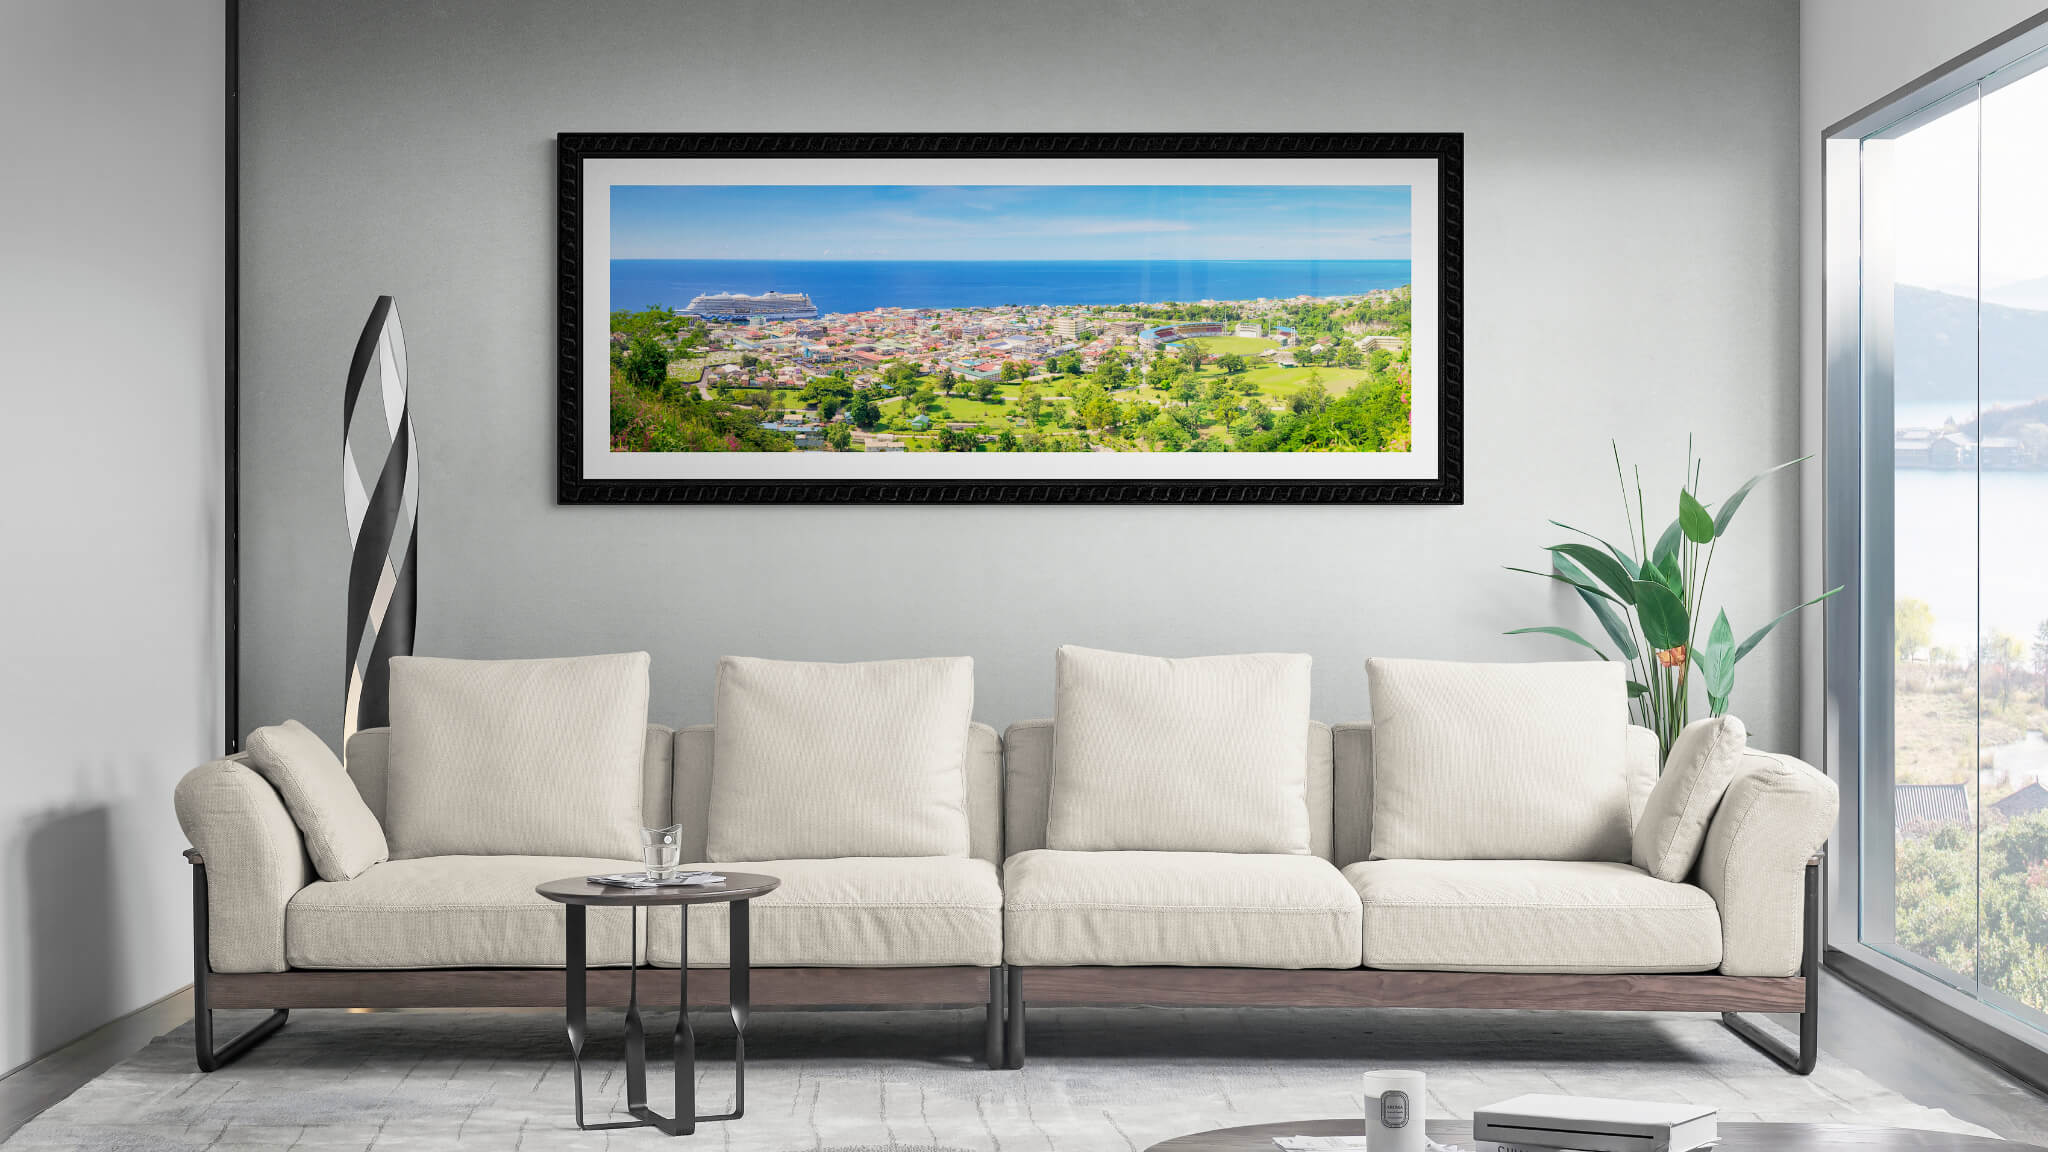 Panoramic framed print of Roseau (from Morne Bruce) hung in a room above a couch.